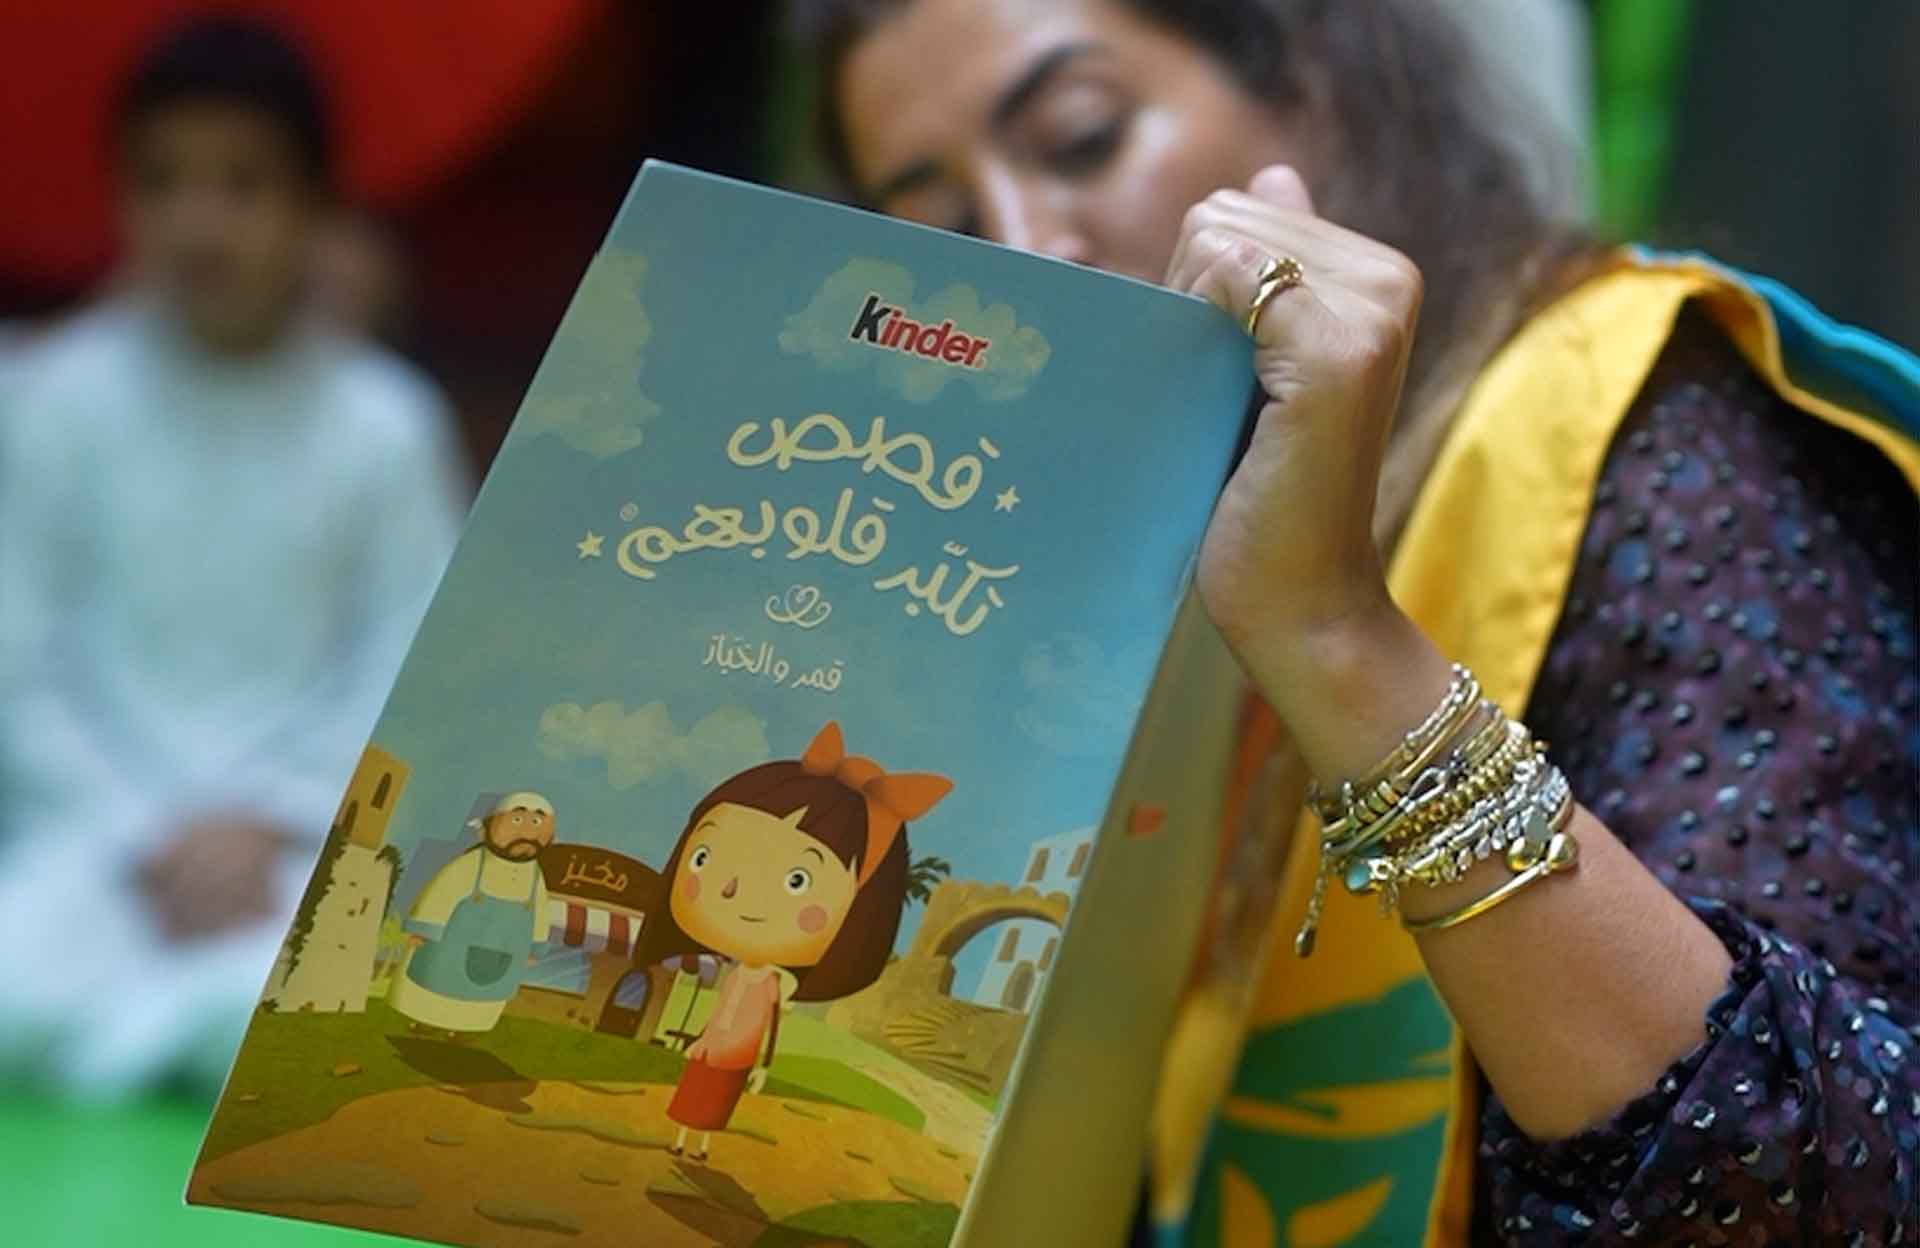 Kinder’s ‘Growing Bigger Hearts’ Campaign Takes the Power of Storytelling to New Heights this Ramadan